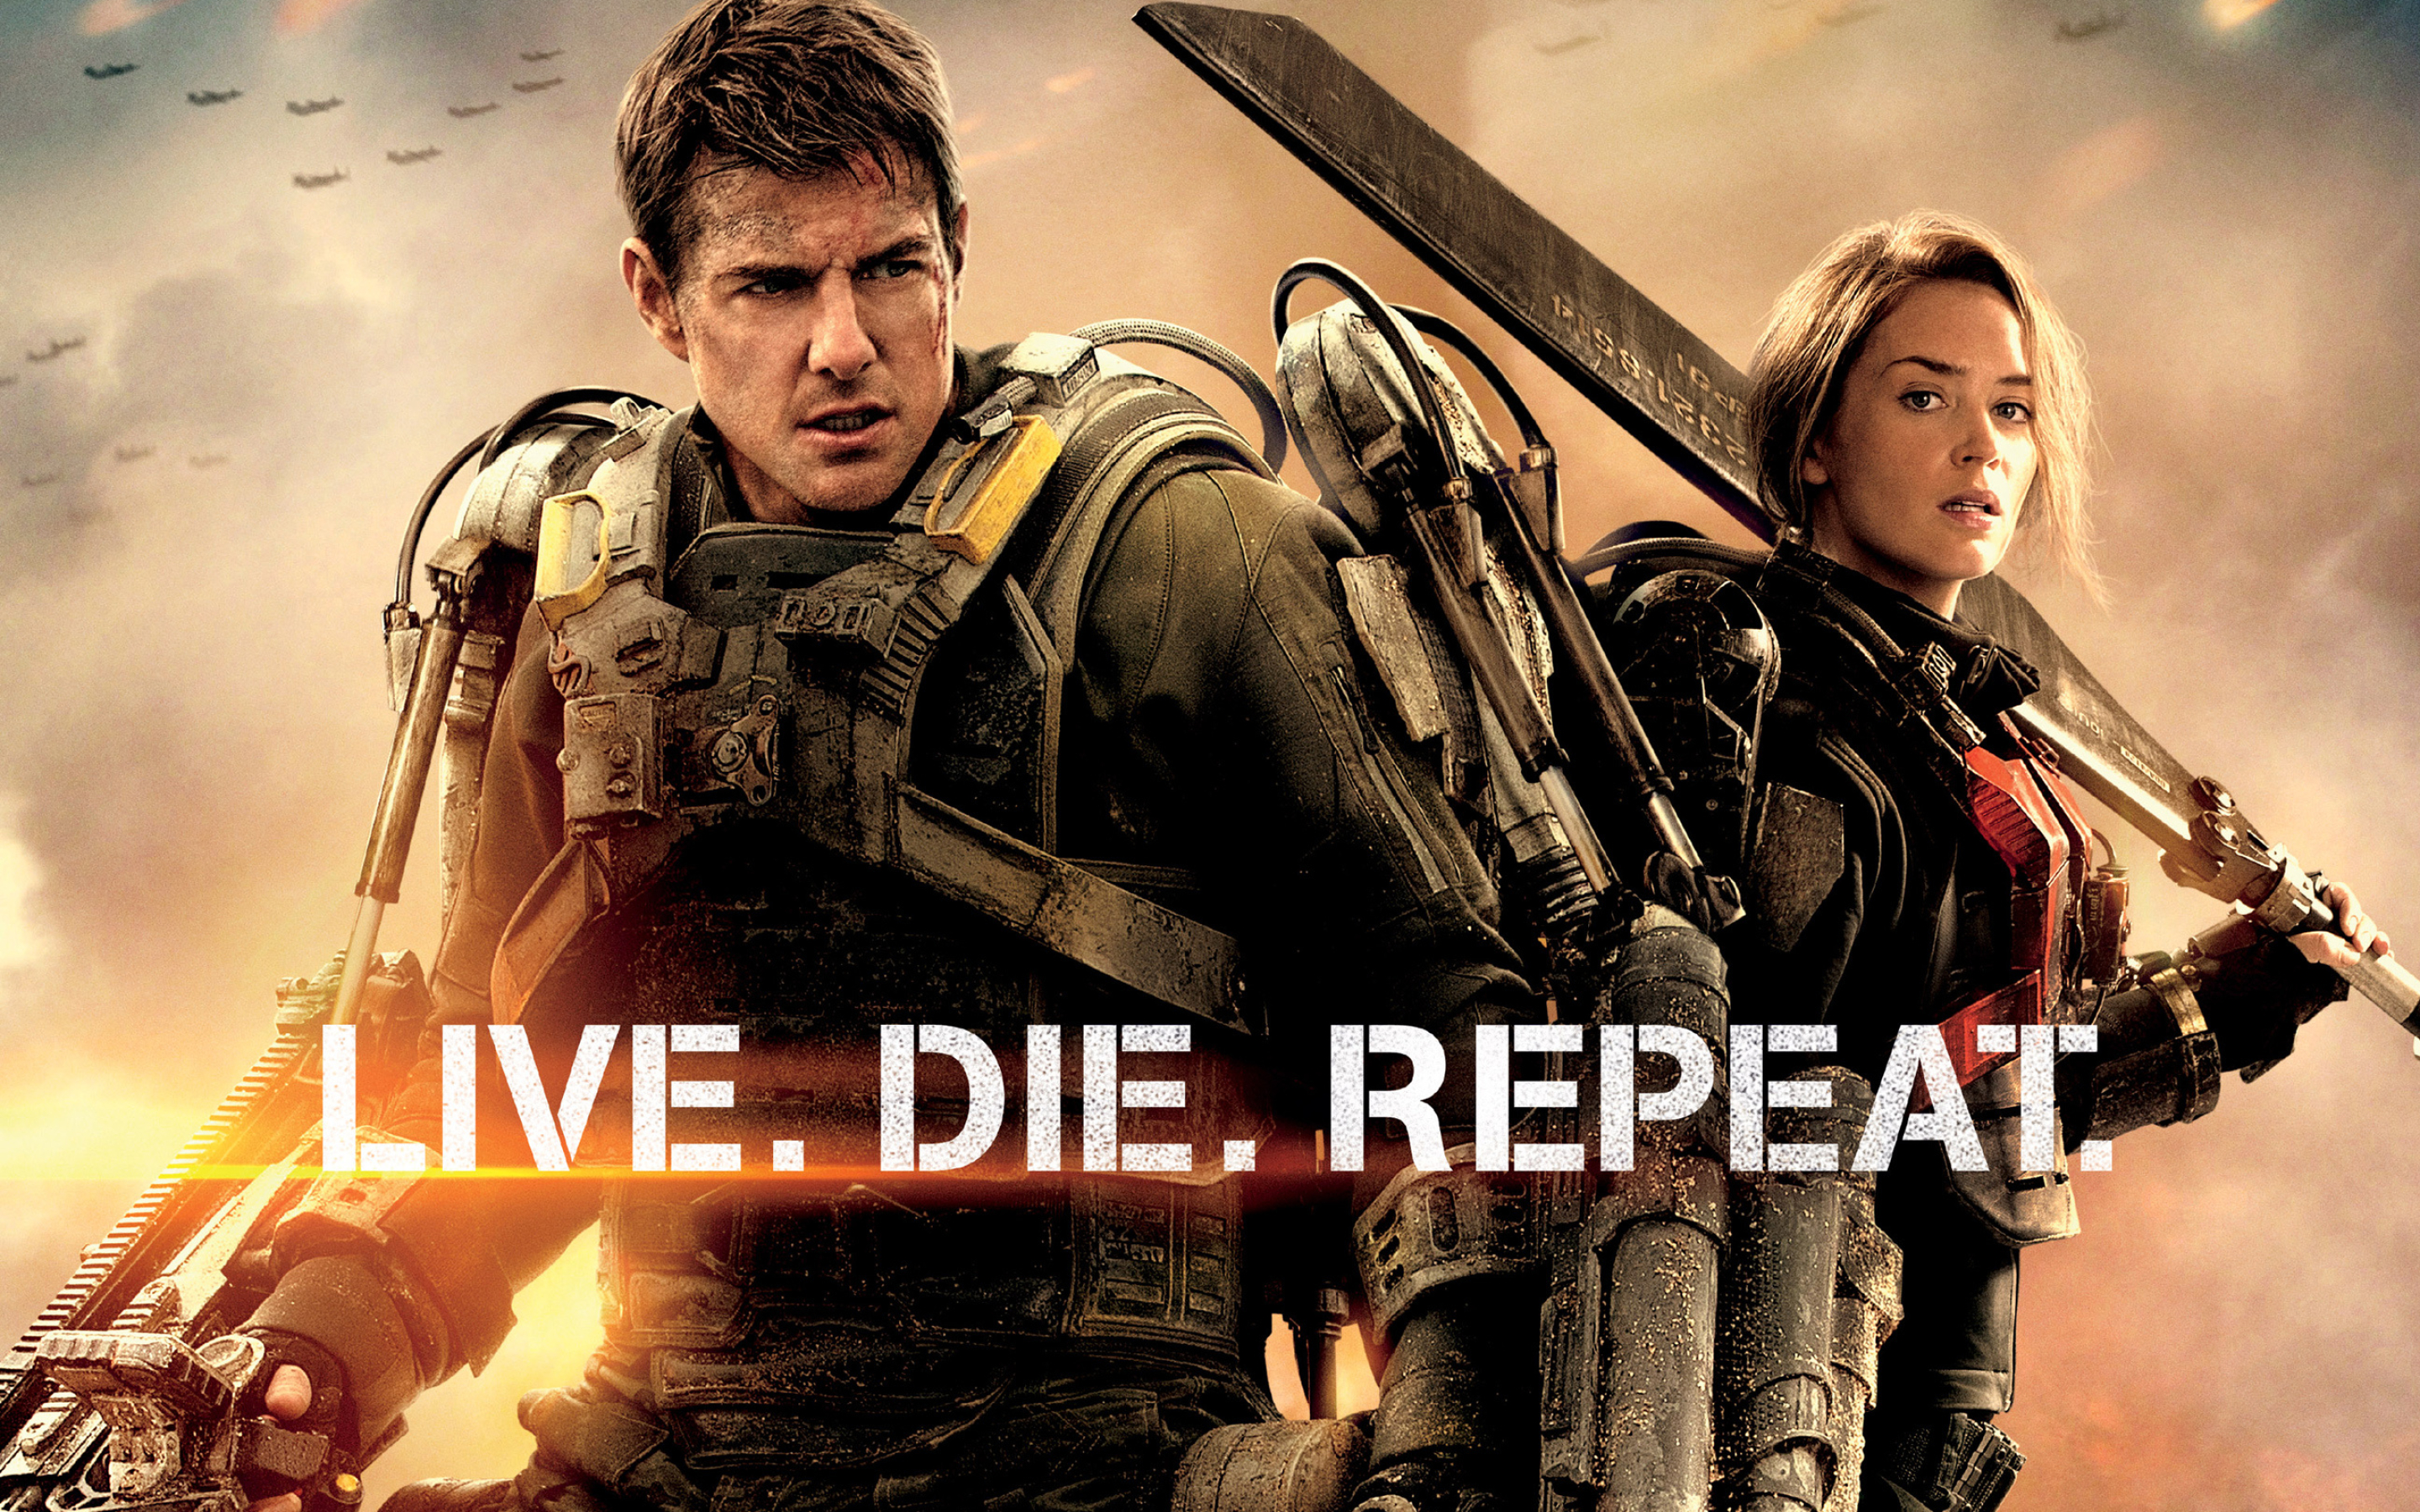 Edge of Tomorrow: Live Die Repeat, A 2014 American science fiction action film. 2880x1800 HD Wallpaper.